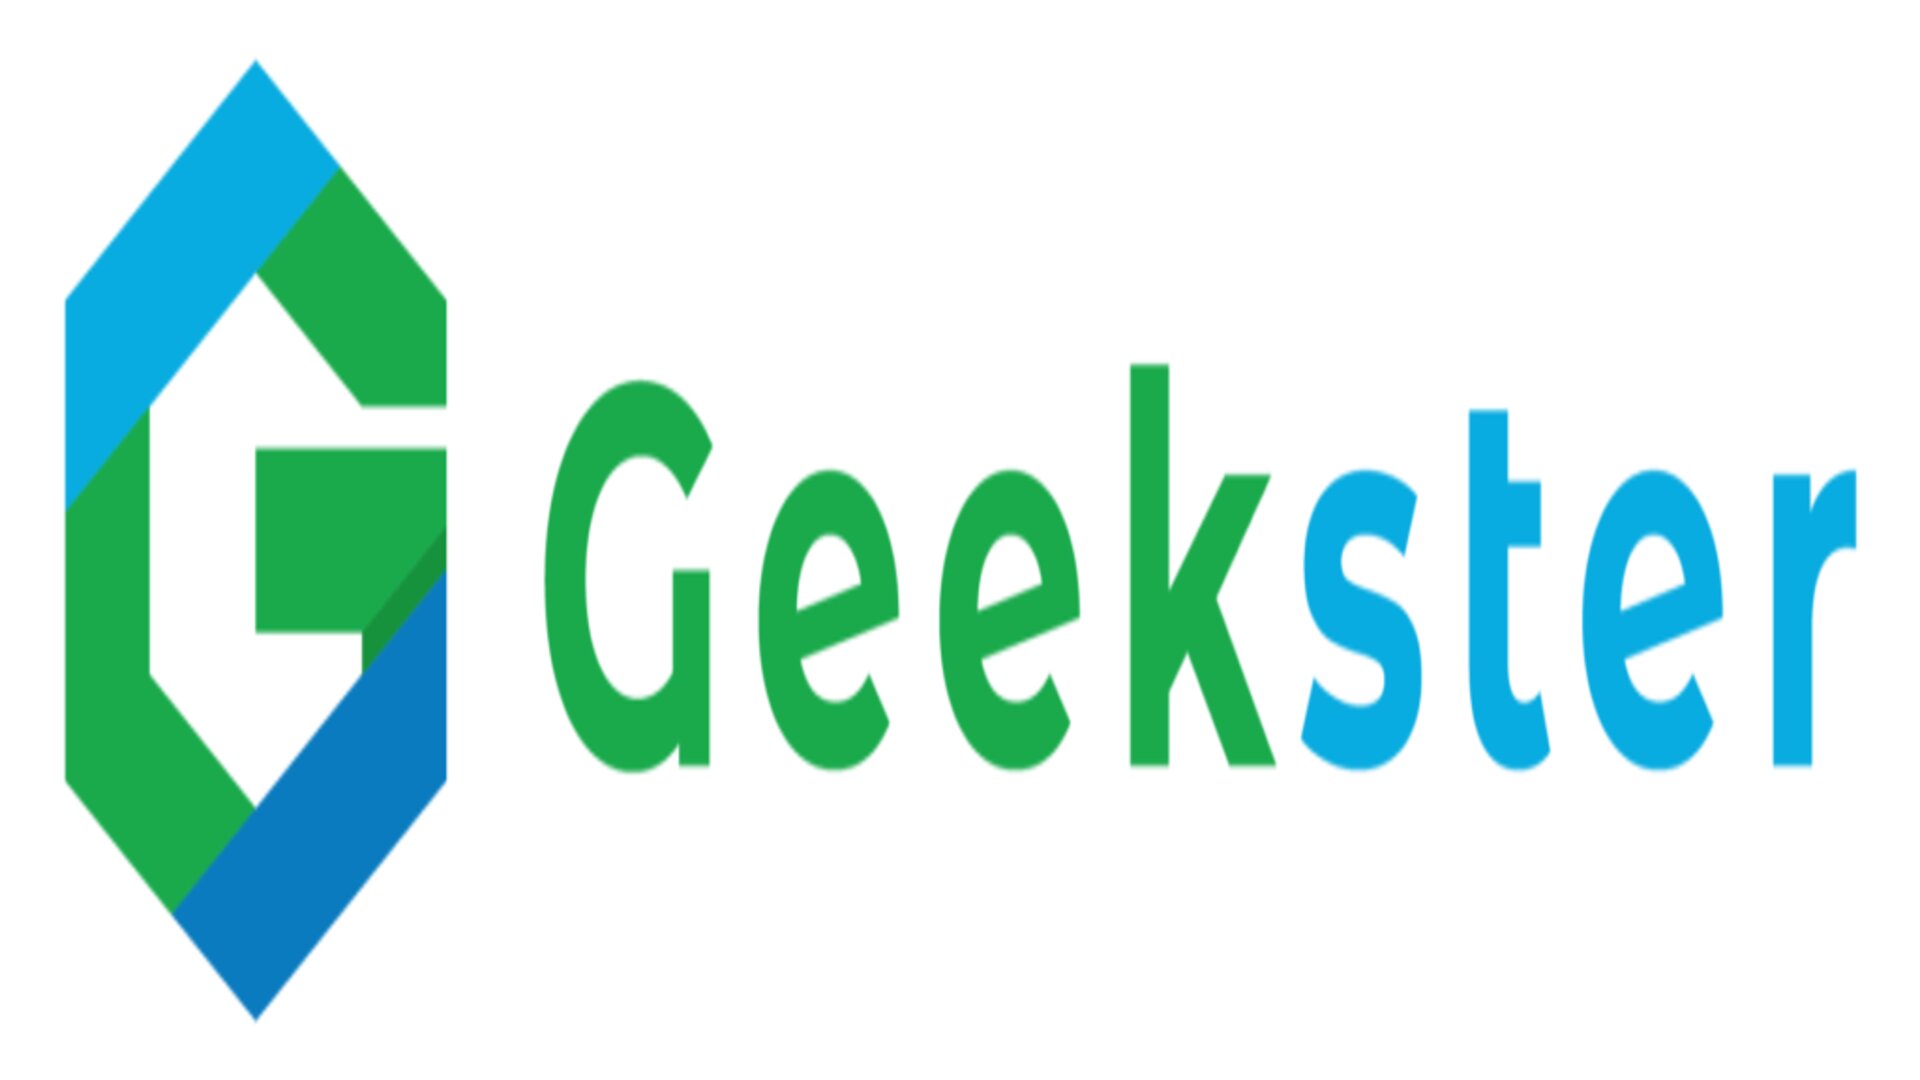 Geekster announces increase in talent pool by 100 per cent in next quarter